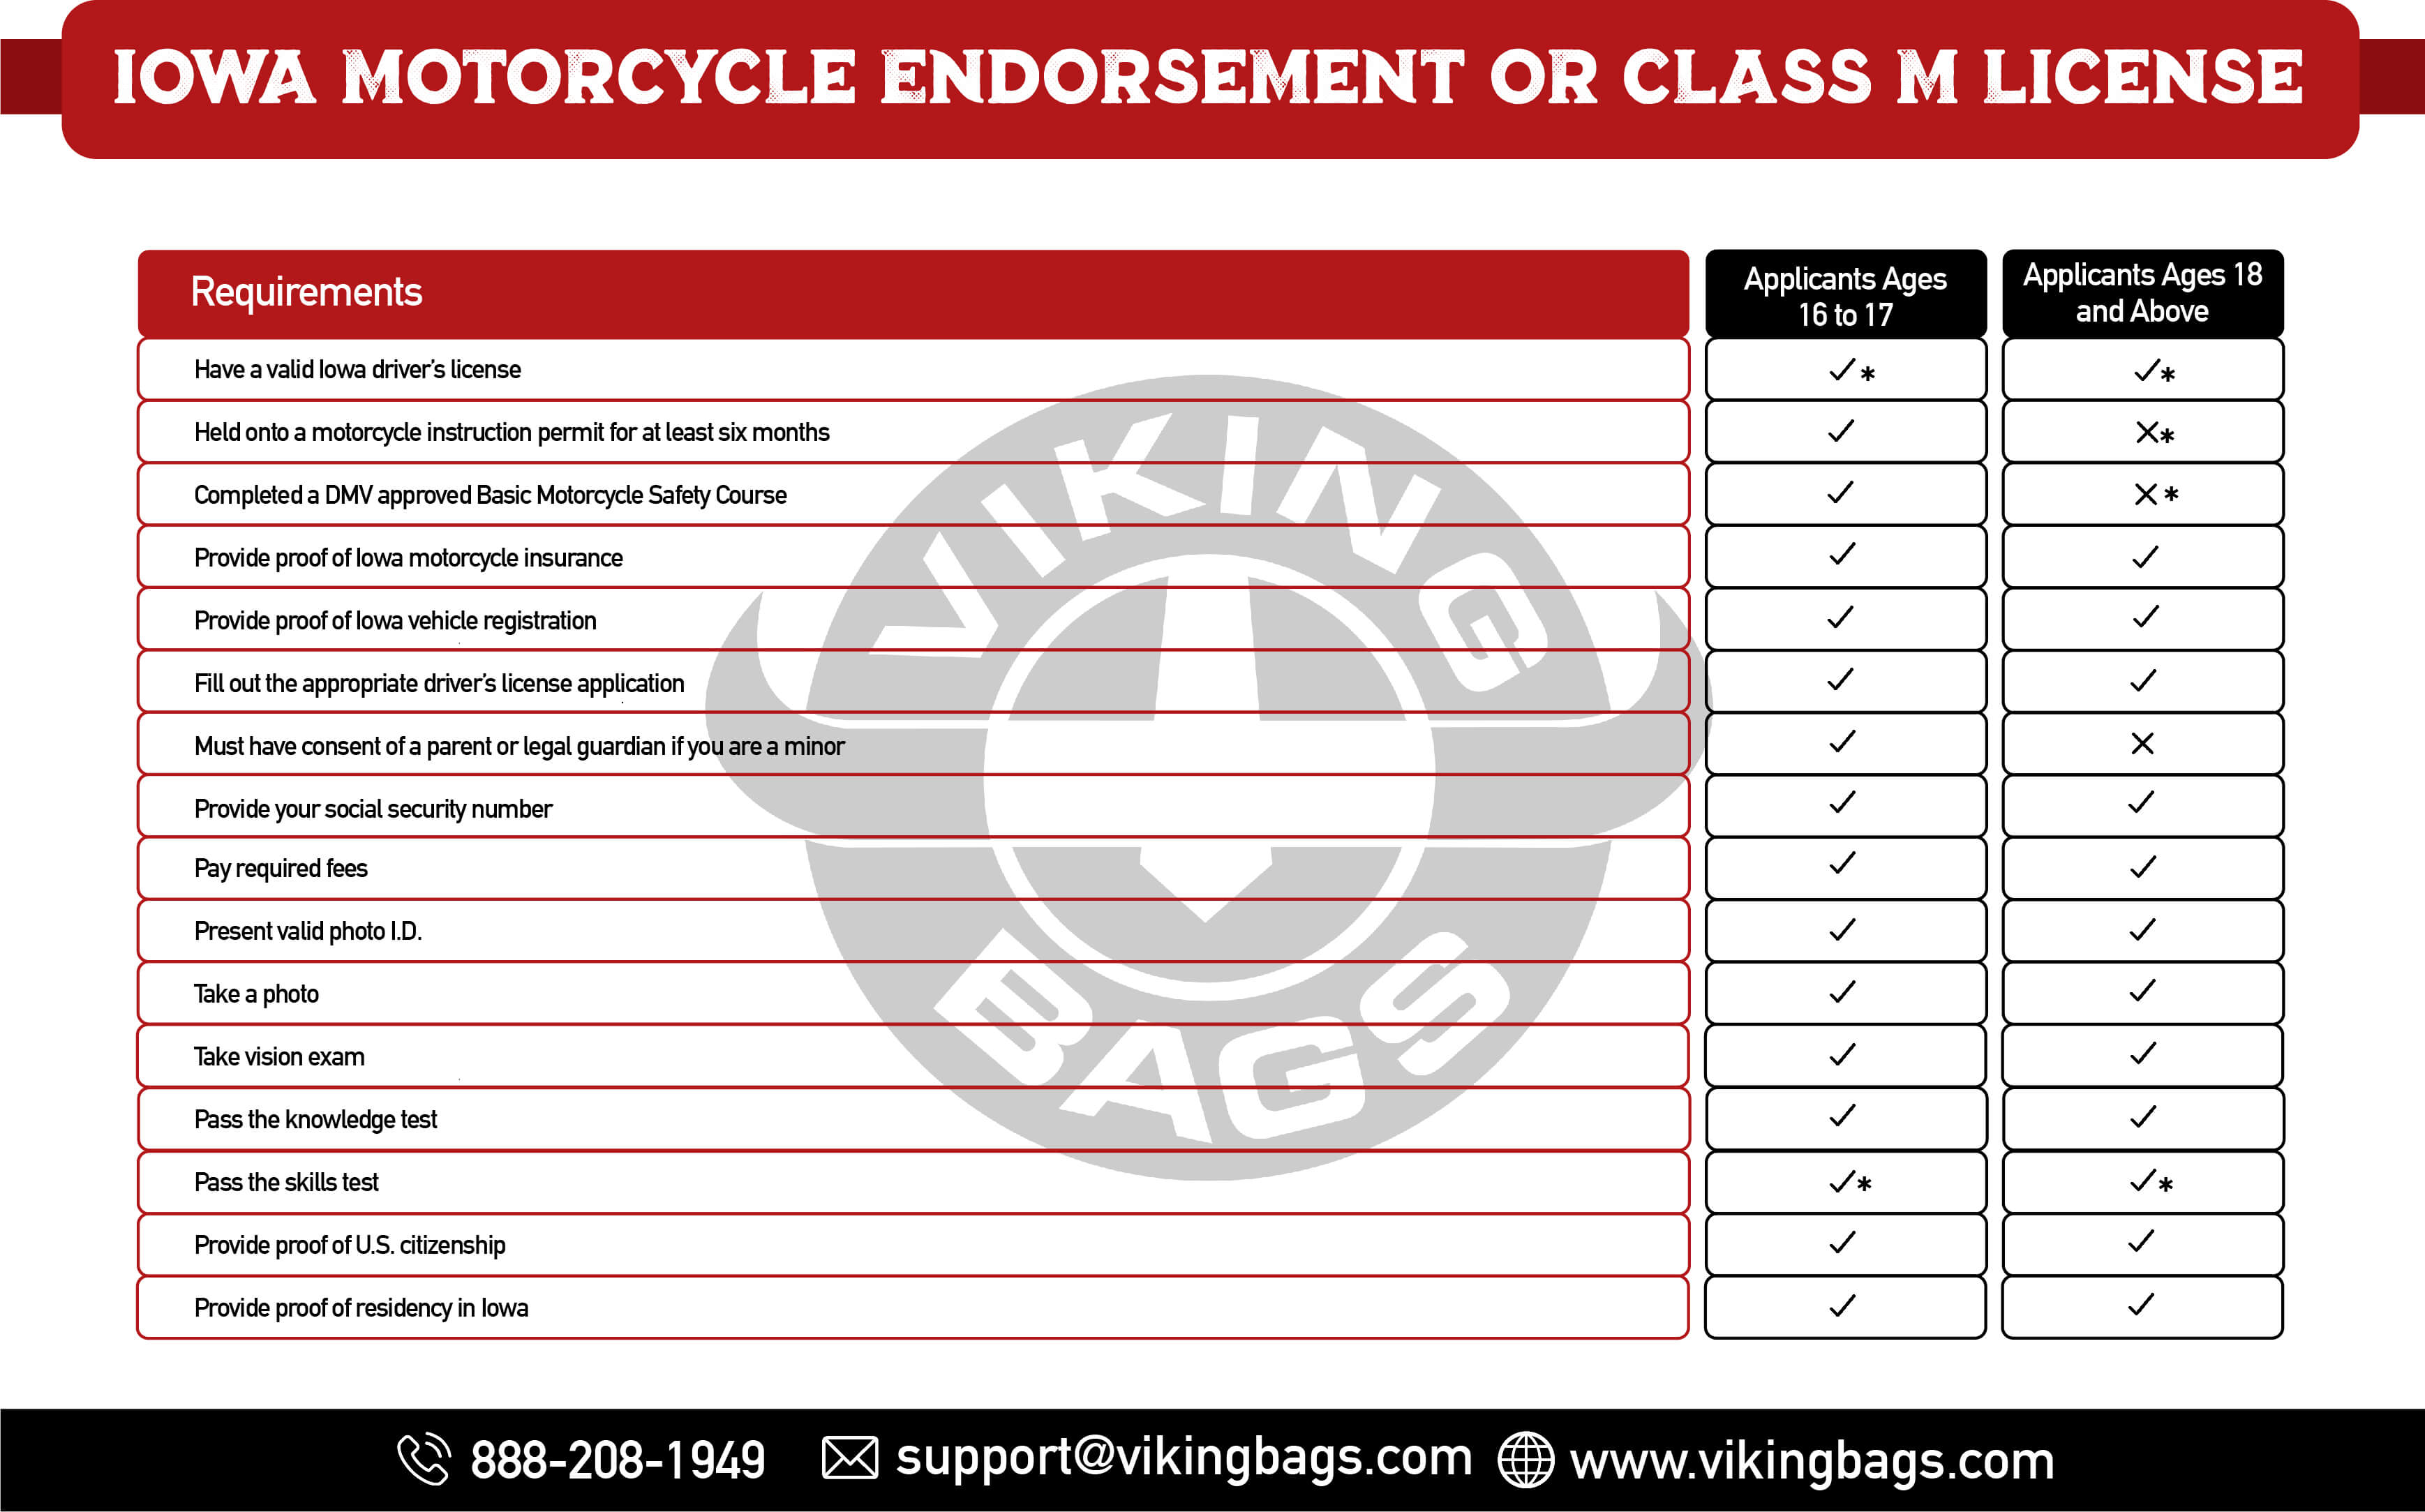 Iowa Motorcycle Endorsement or Class M License